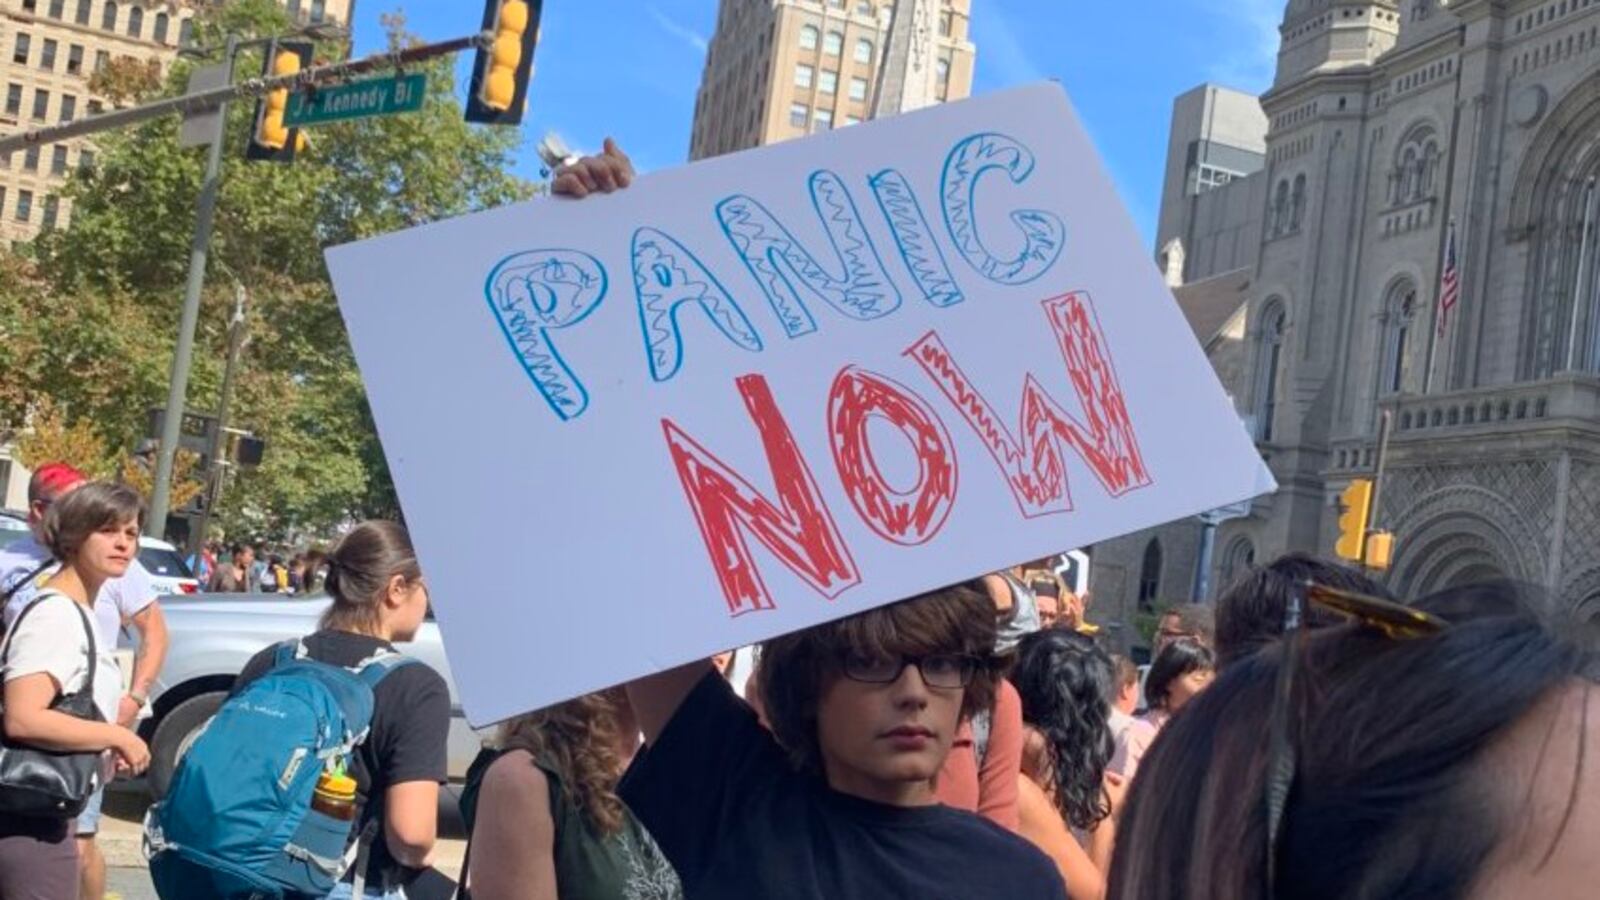 A “Panic now” sign reflects the urgency of young people who are worried about the future of the Earth.